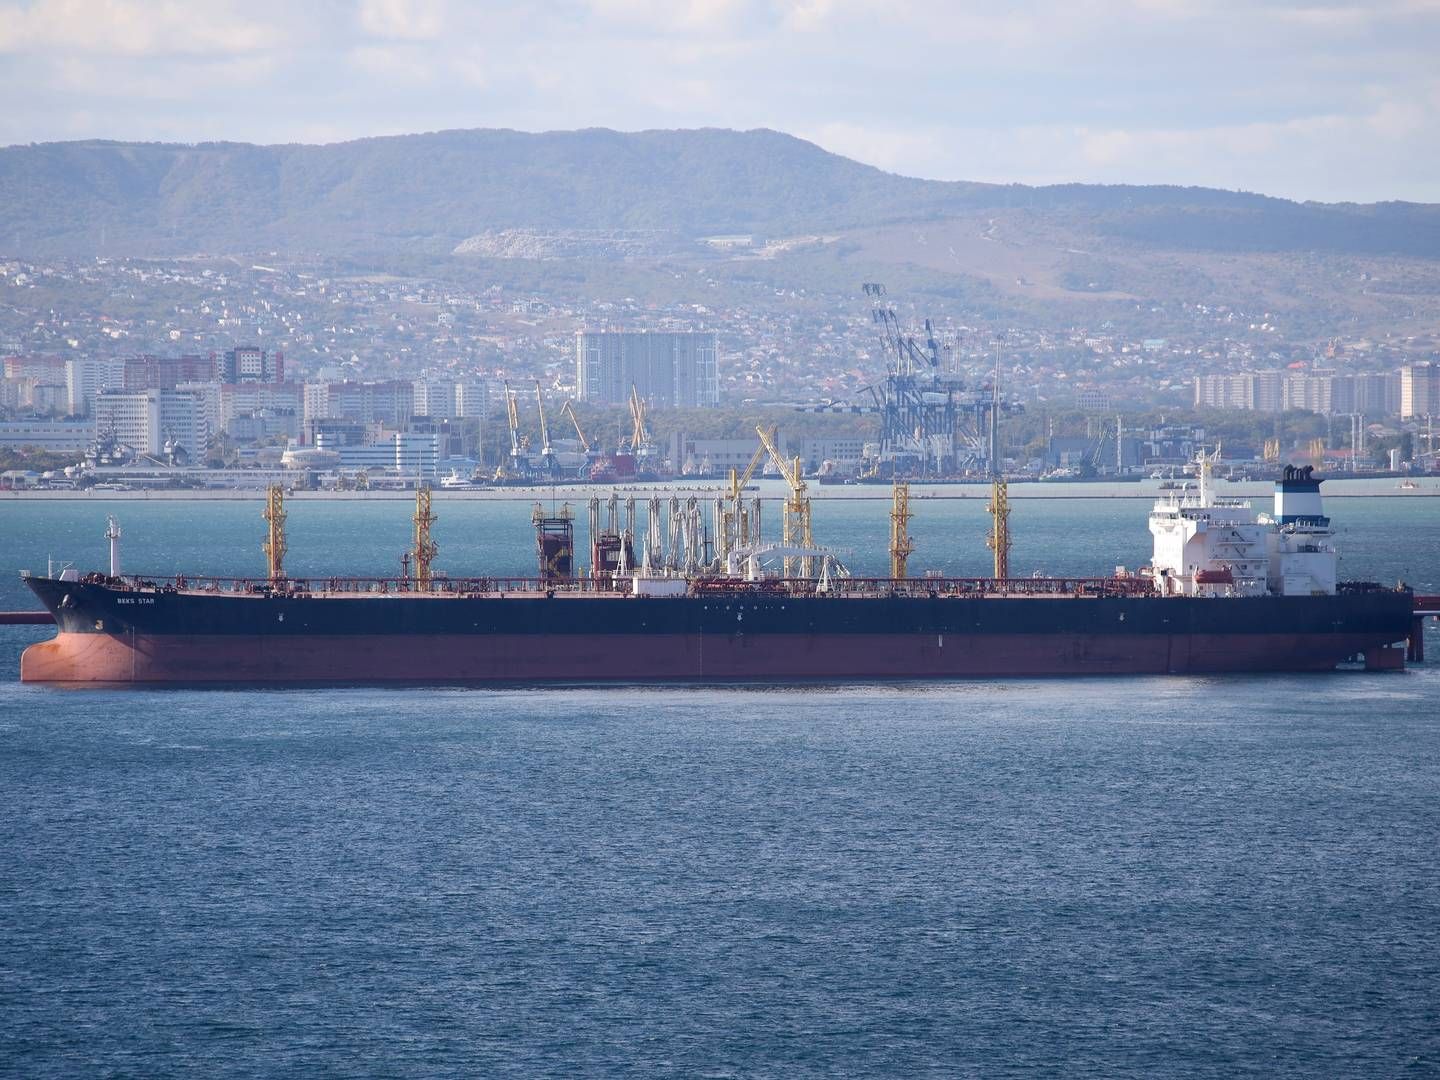 The blocking of ships would have to be done under UN rules that allow countries to check ships for fear that they may pose an environmental threat. File photo of tanker in Russia. | Photo: Uncredited/AP/Ritzau Scanpix